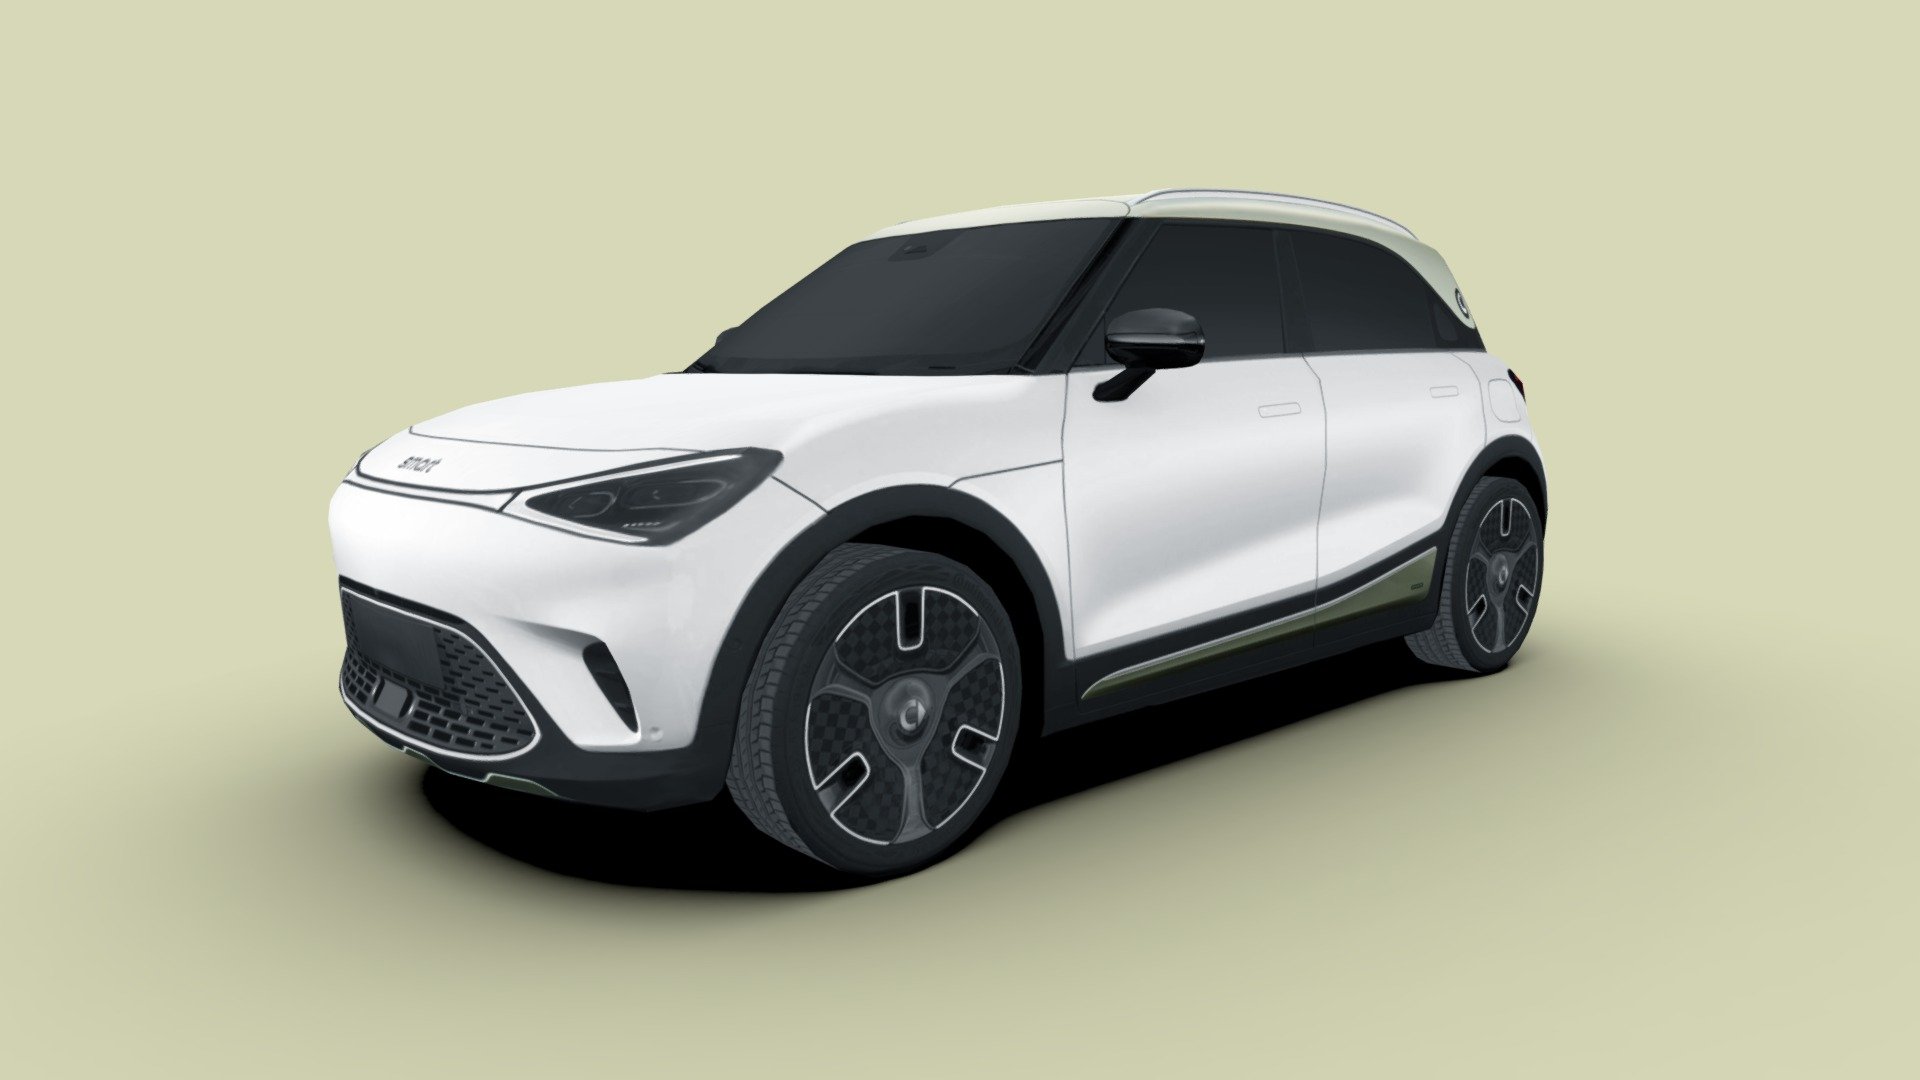 3d model of the 2023 Smart #1, a all-electric subcompact crossover SUV.

The model is very low-poly, full-scale, real photos texture (single 2048 x 2048 png).

Package includes 5 file formats and texture (3ds, fbx, dae, obj and skp)

Hope you enjoy it.

José Bronze - Smart #1 2023 - Buy Royalty Free 3D model by Jose Bronze (@pinceladas3d) 3d model